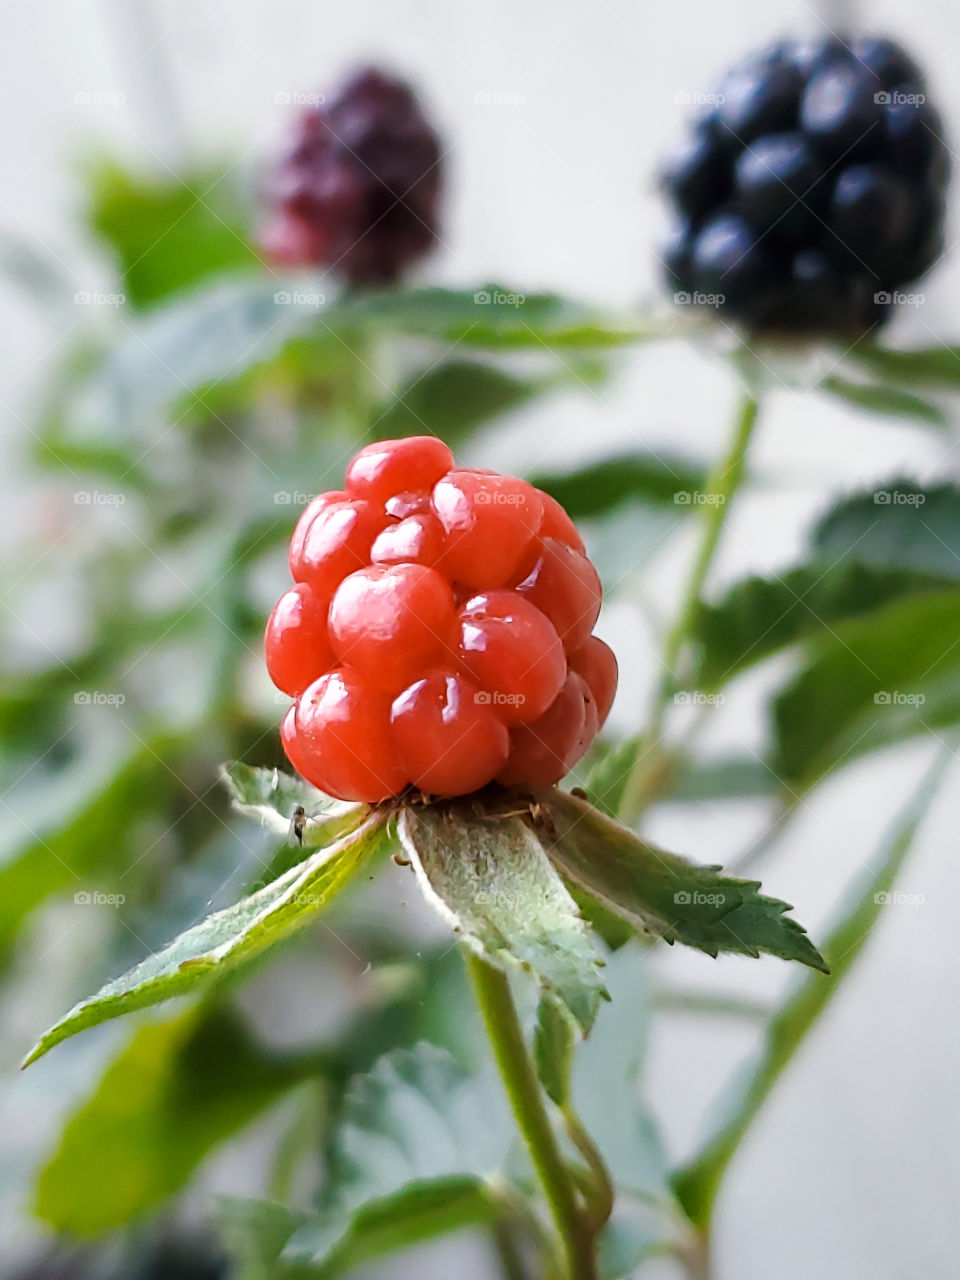 Navajo blackberries are a sweeter variety of blackberries that ripen and are ready for harvesting in the early summer months in the southern parts of the the USA. A delicious sweet treat to look forward to every summer.